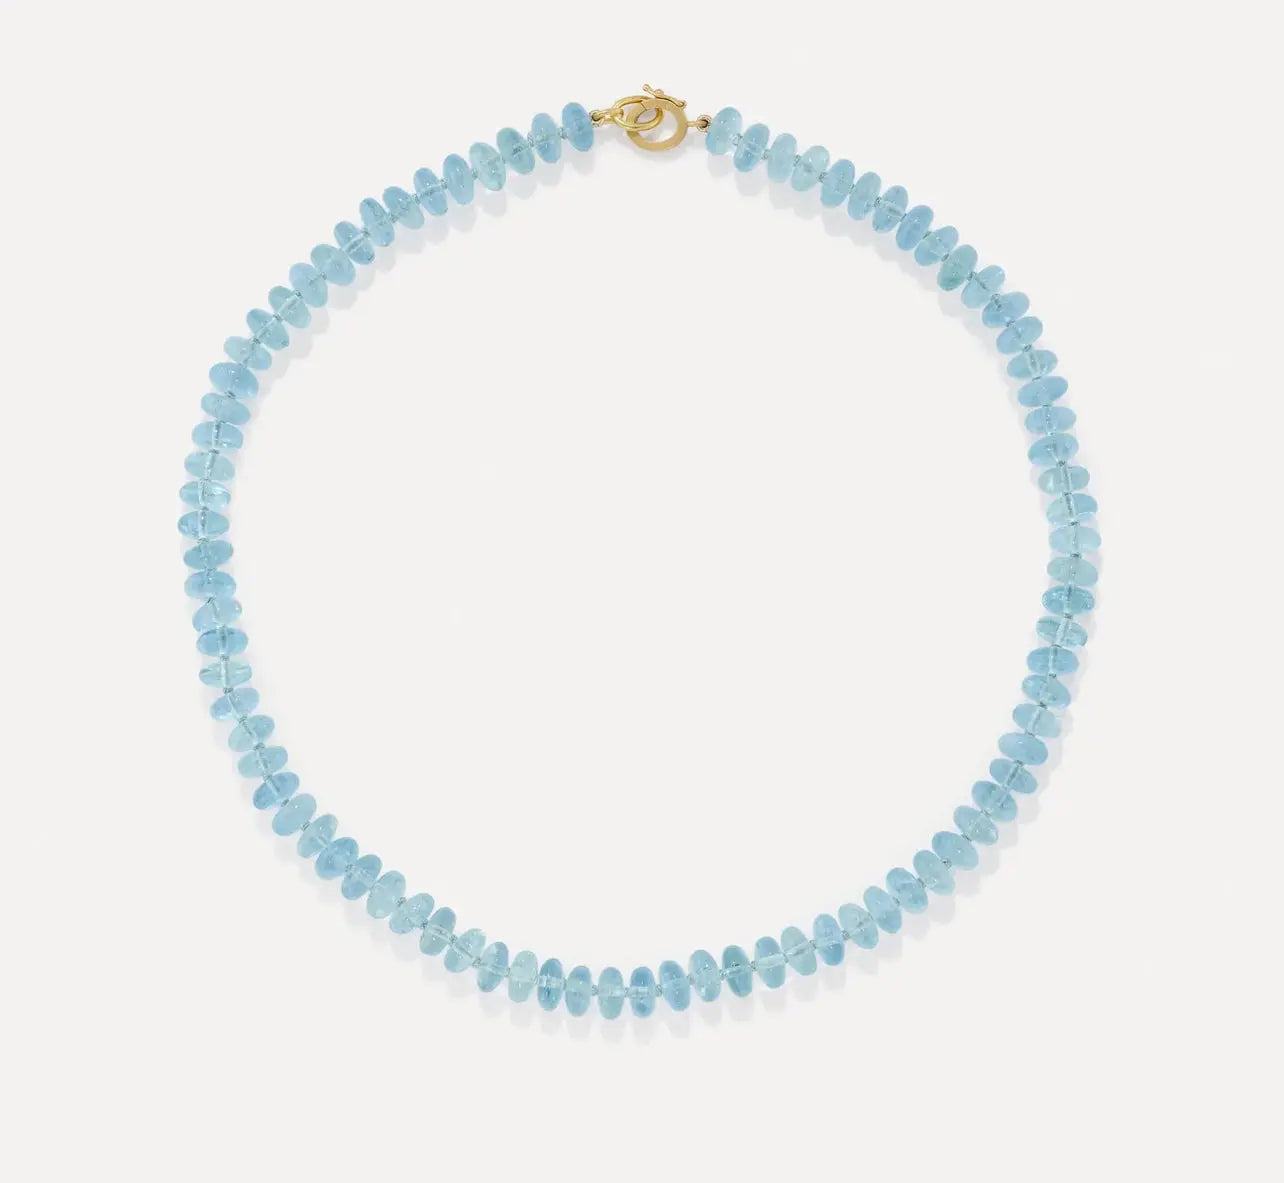 Irene Neuwirth's beaded candy collection necklace in Aquamarine. This is piece is hand string and knotted between each bead. The clasp is 18k yellow gold and the length is 16 inches.